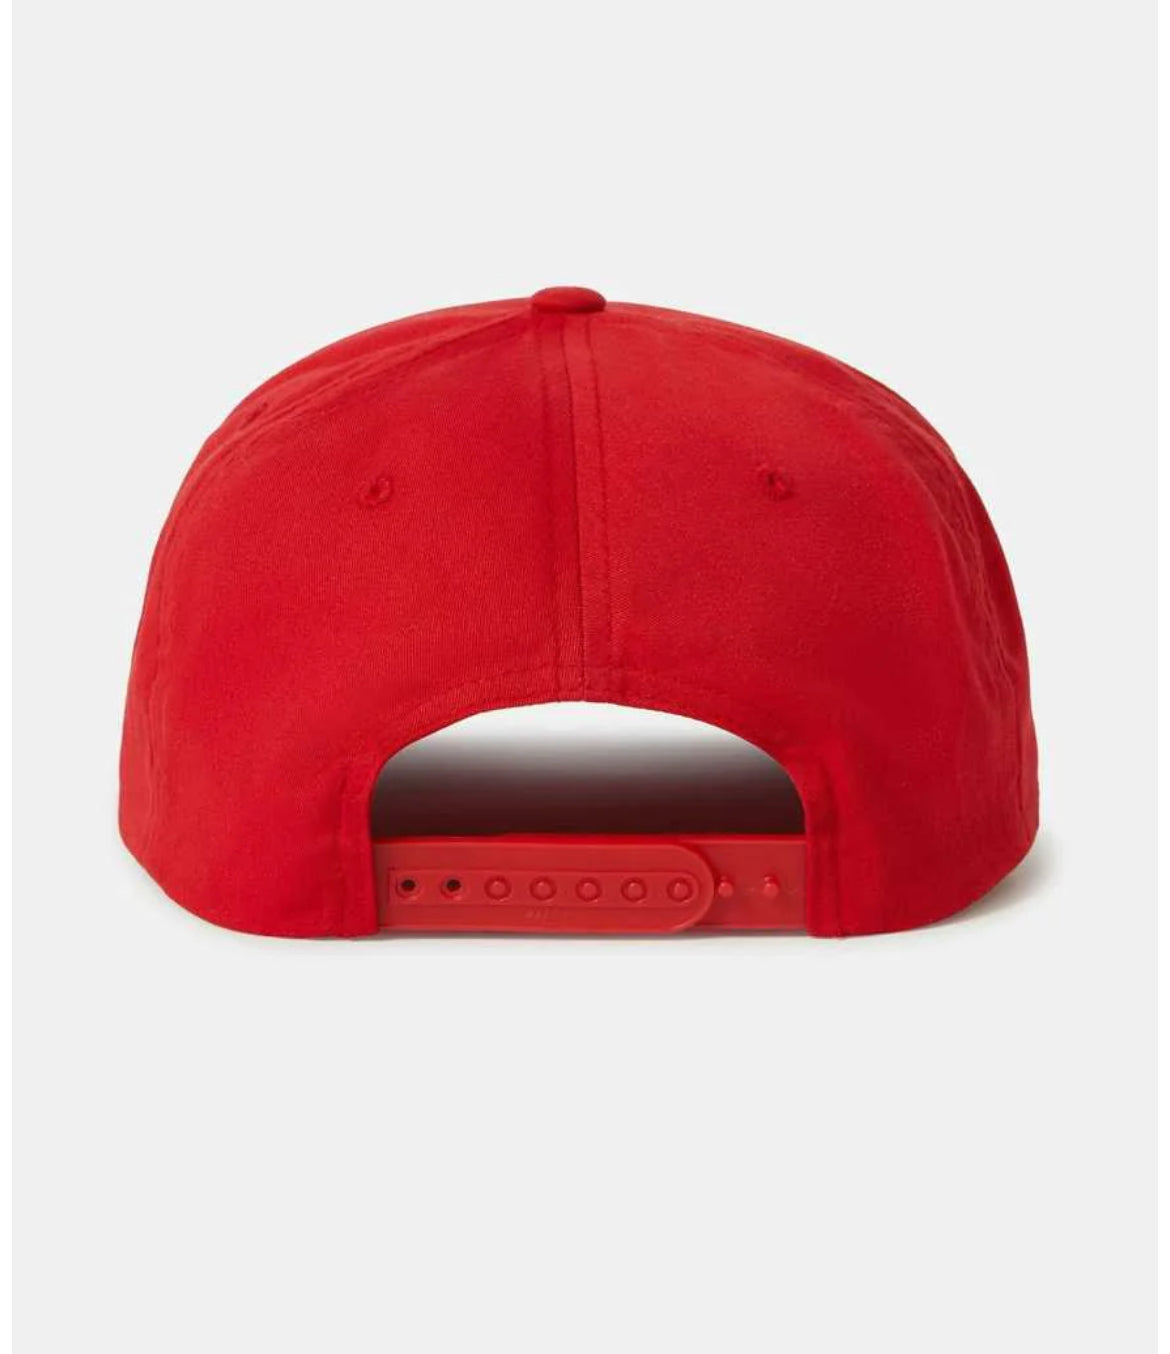 Coors SYL Banquet Snapback- Red